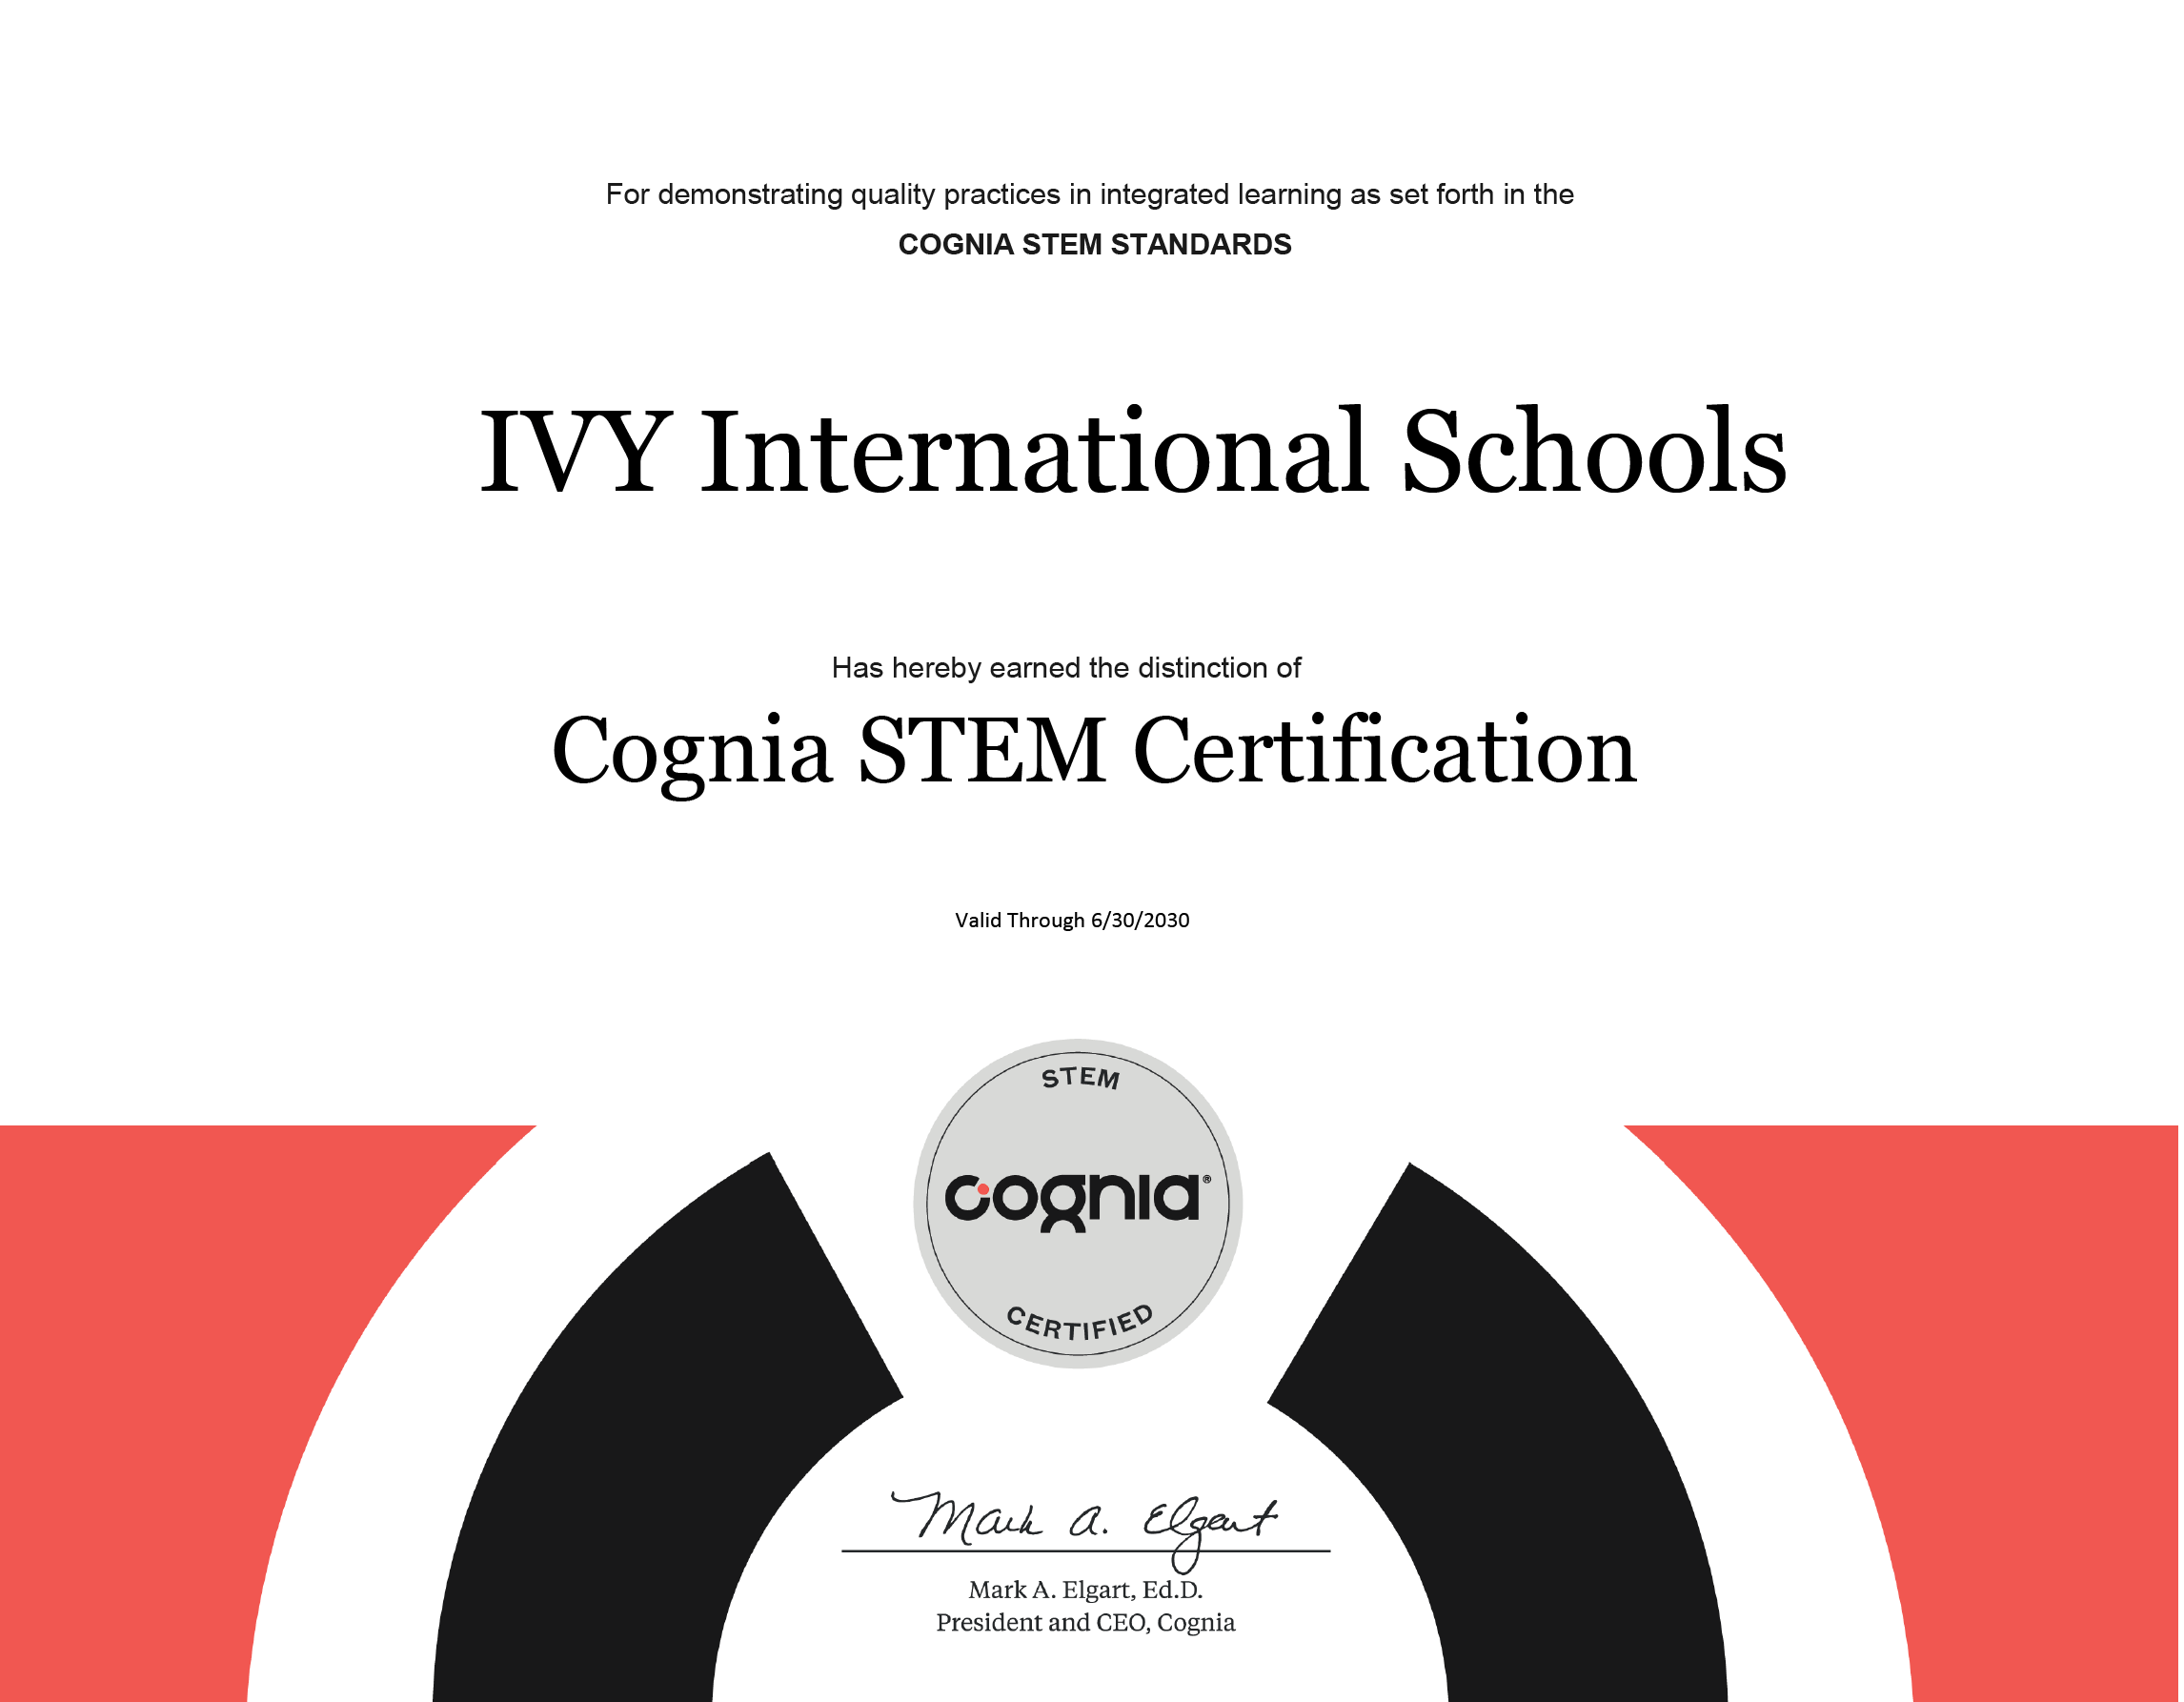 IVY International Schools in Egypt is proud to be recognized as the best STEM school and the top-rated accredited school in the country. We have achieved the prestigious Cognia STEM Certification, demonstrating our commitment to providing high-quality integrated learning experiences. This certification is a testament to our dedication to excellence in education. At IVY International Schools, we strive to provide the best STEM education in Egypt, preparing our students for successful futures in Aar, science, technology, engineering, and mathematics.
